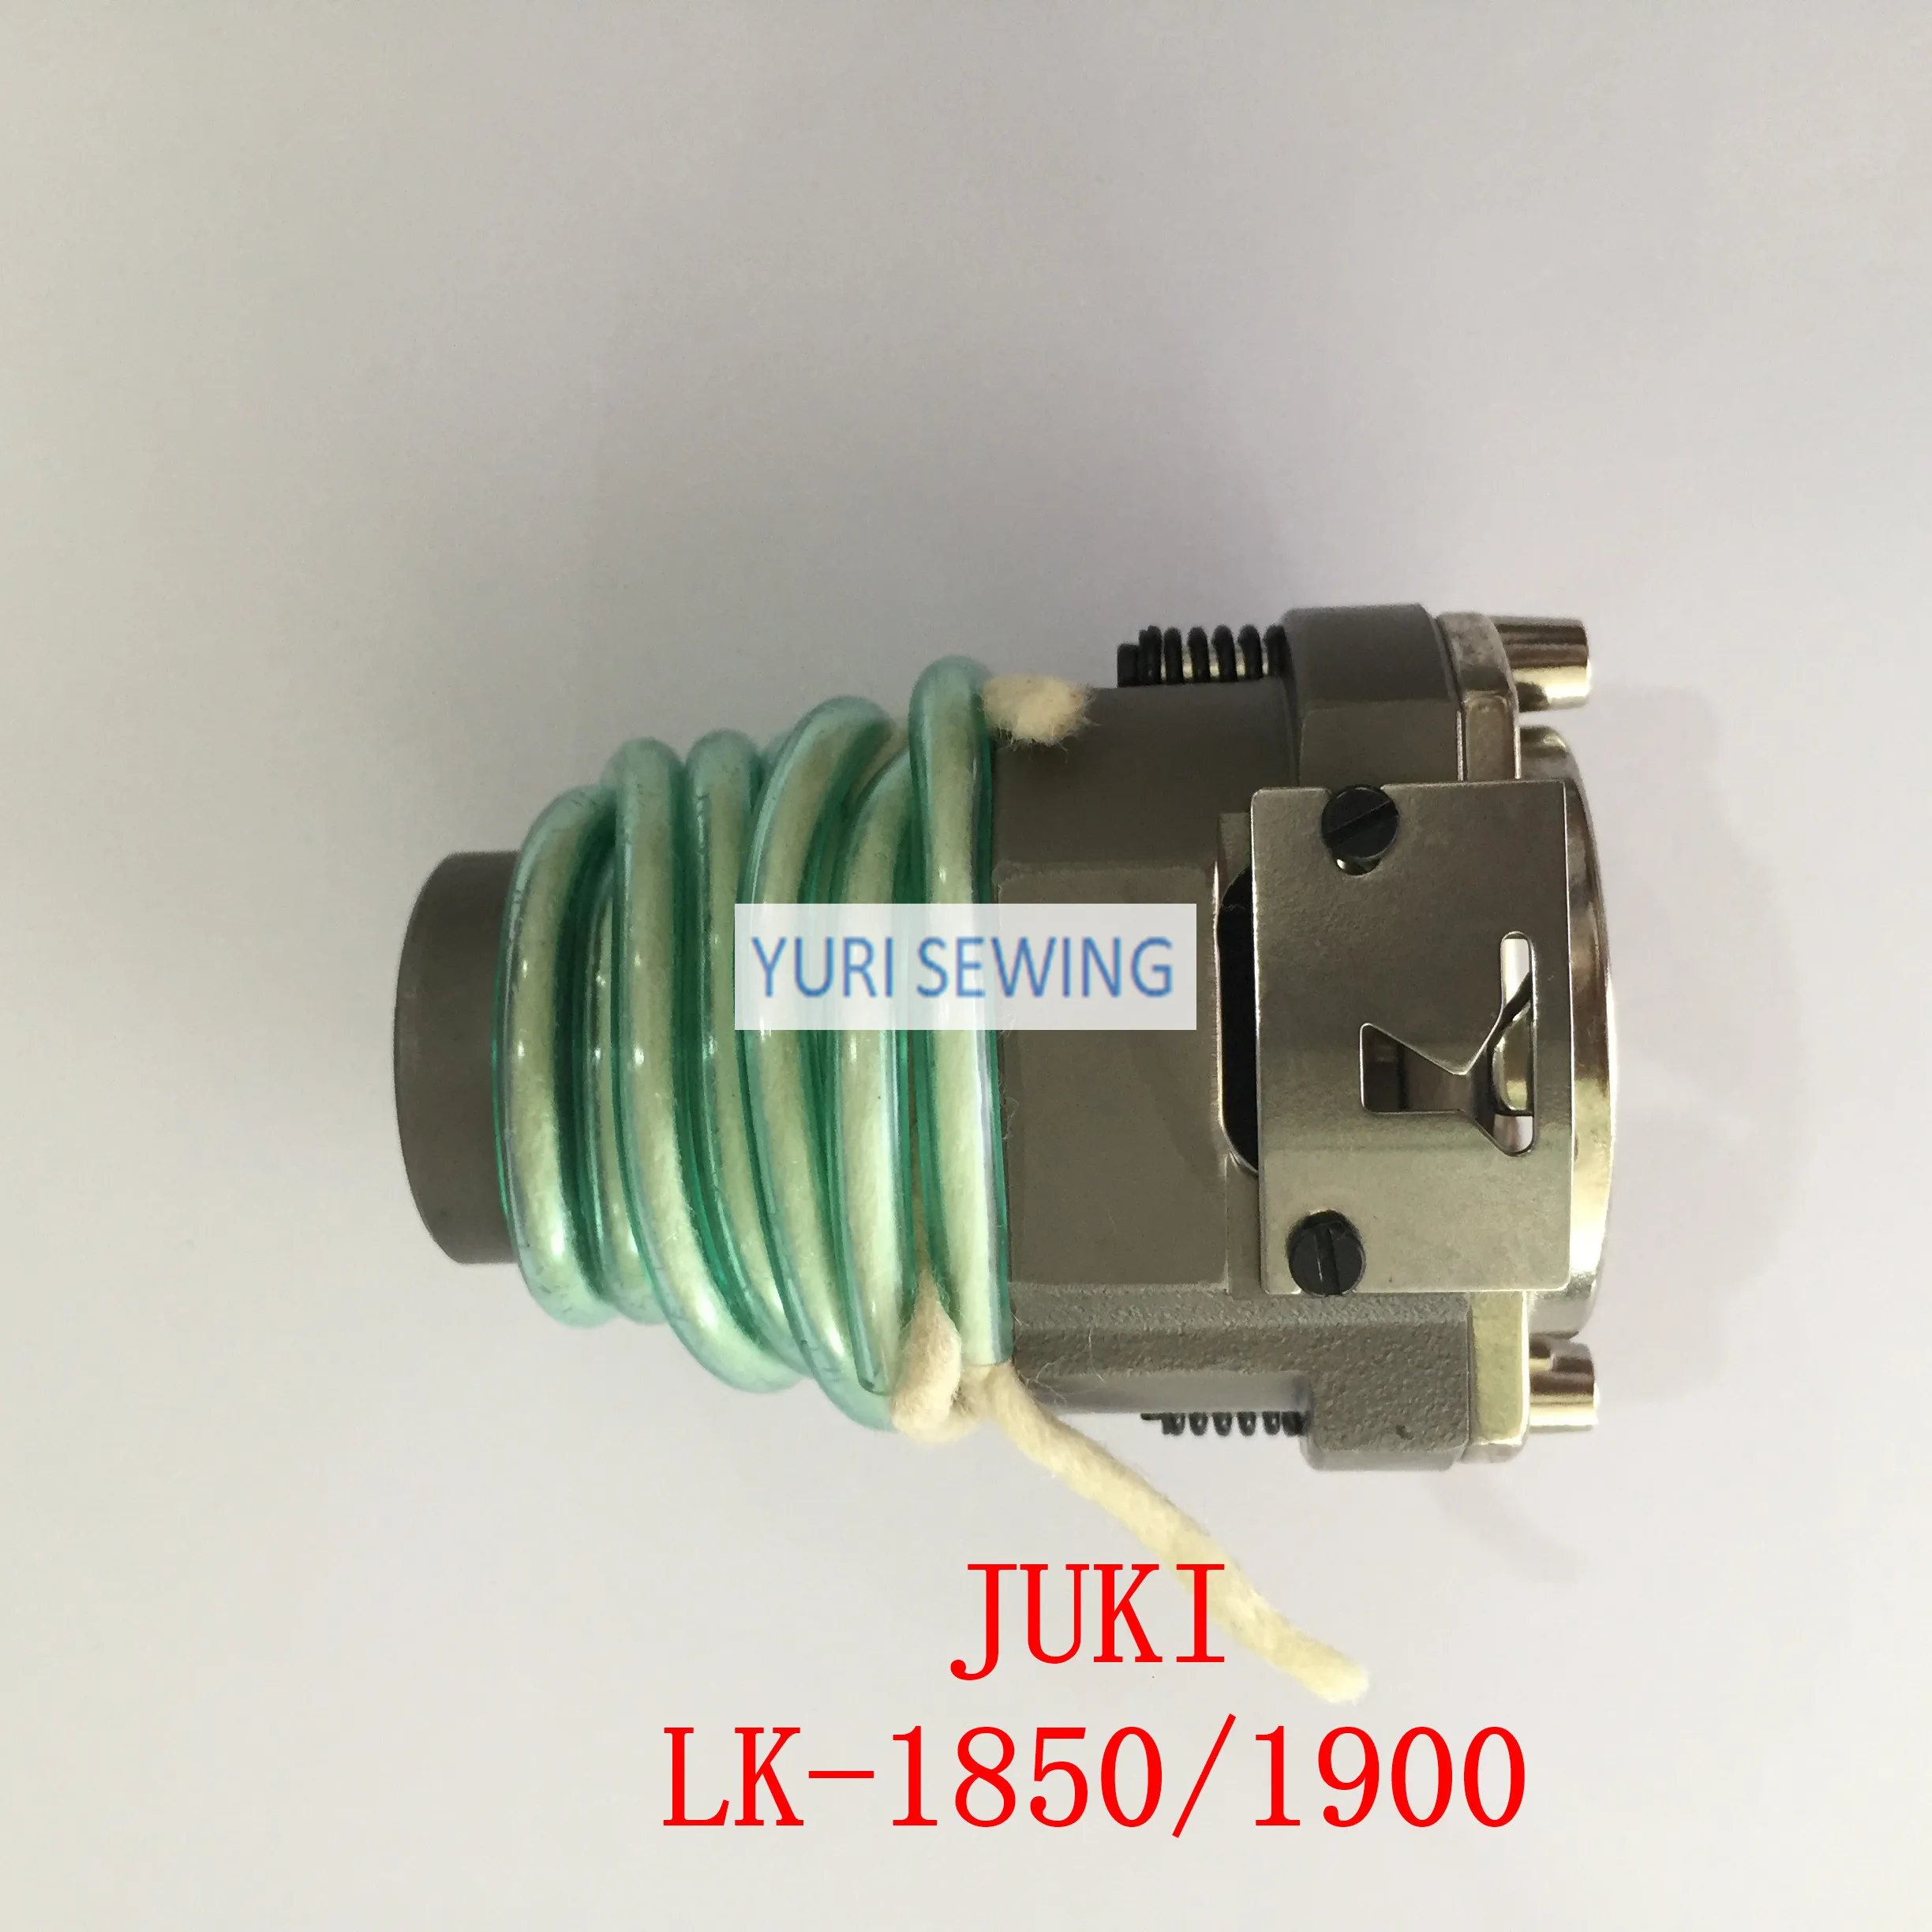 

High quality JUKI LK-1900/1850/1910/1930 shuttle asm 141-03055/B1814-980-000 old type industrial sewing machine spare parts